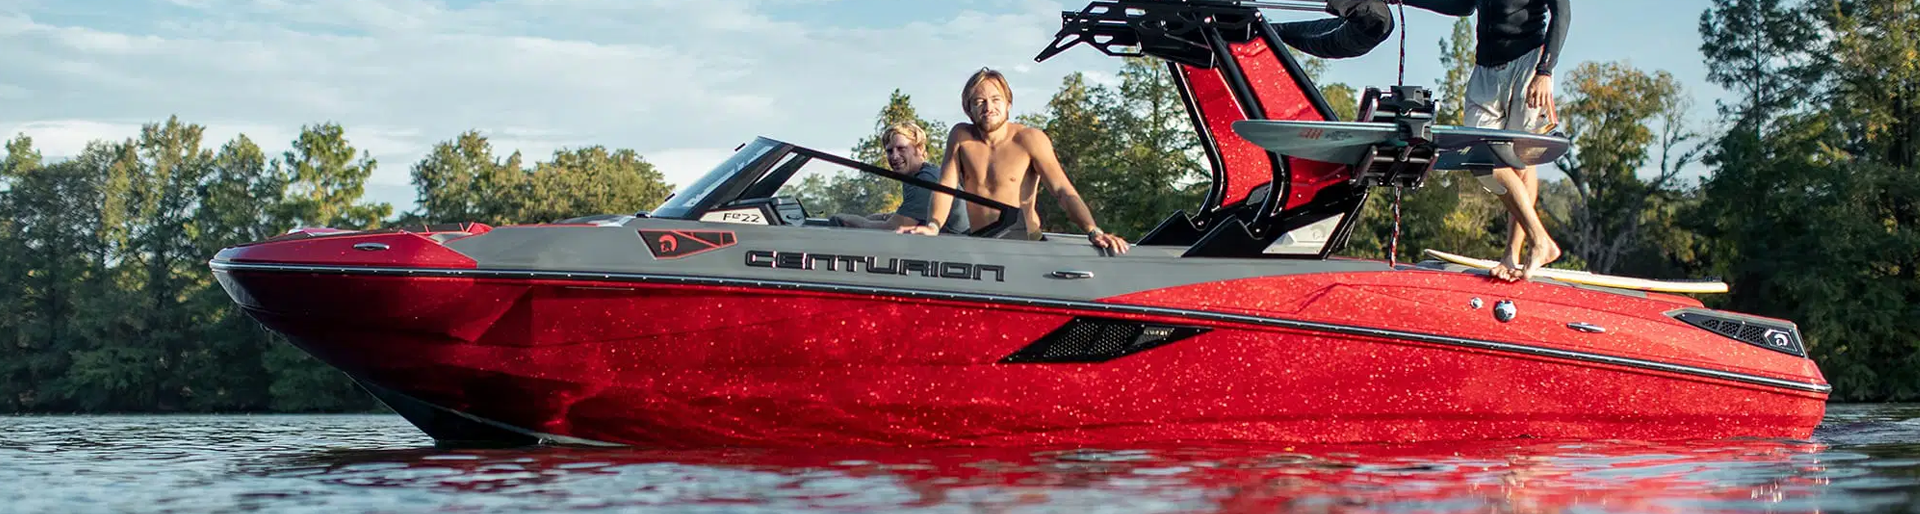 2022  Supreme Boat for sale in Absolut Watersports, Strathmore, Alberta